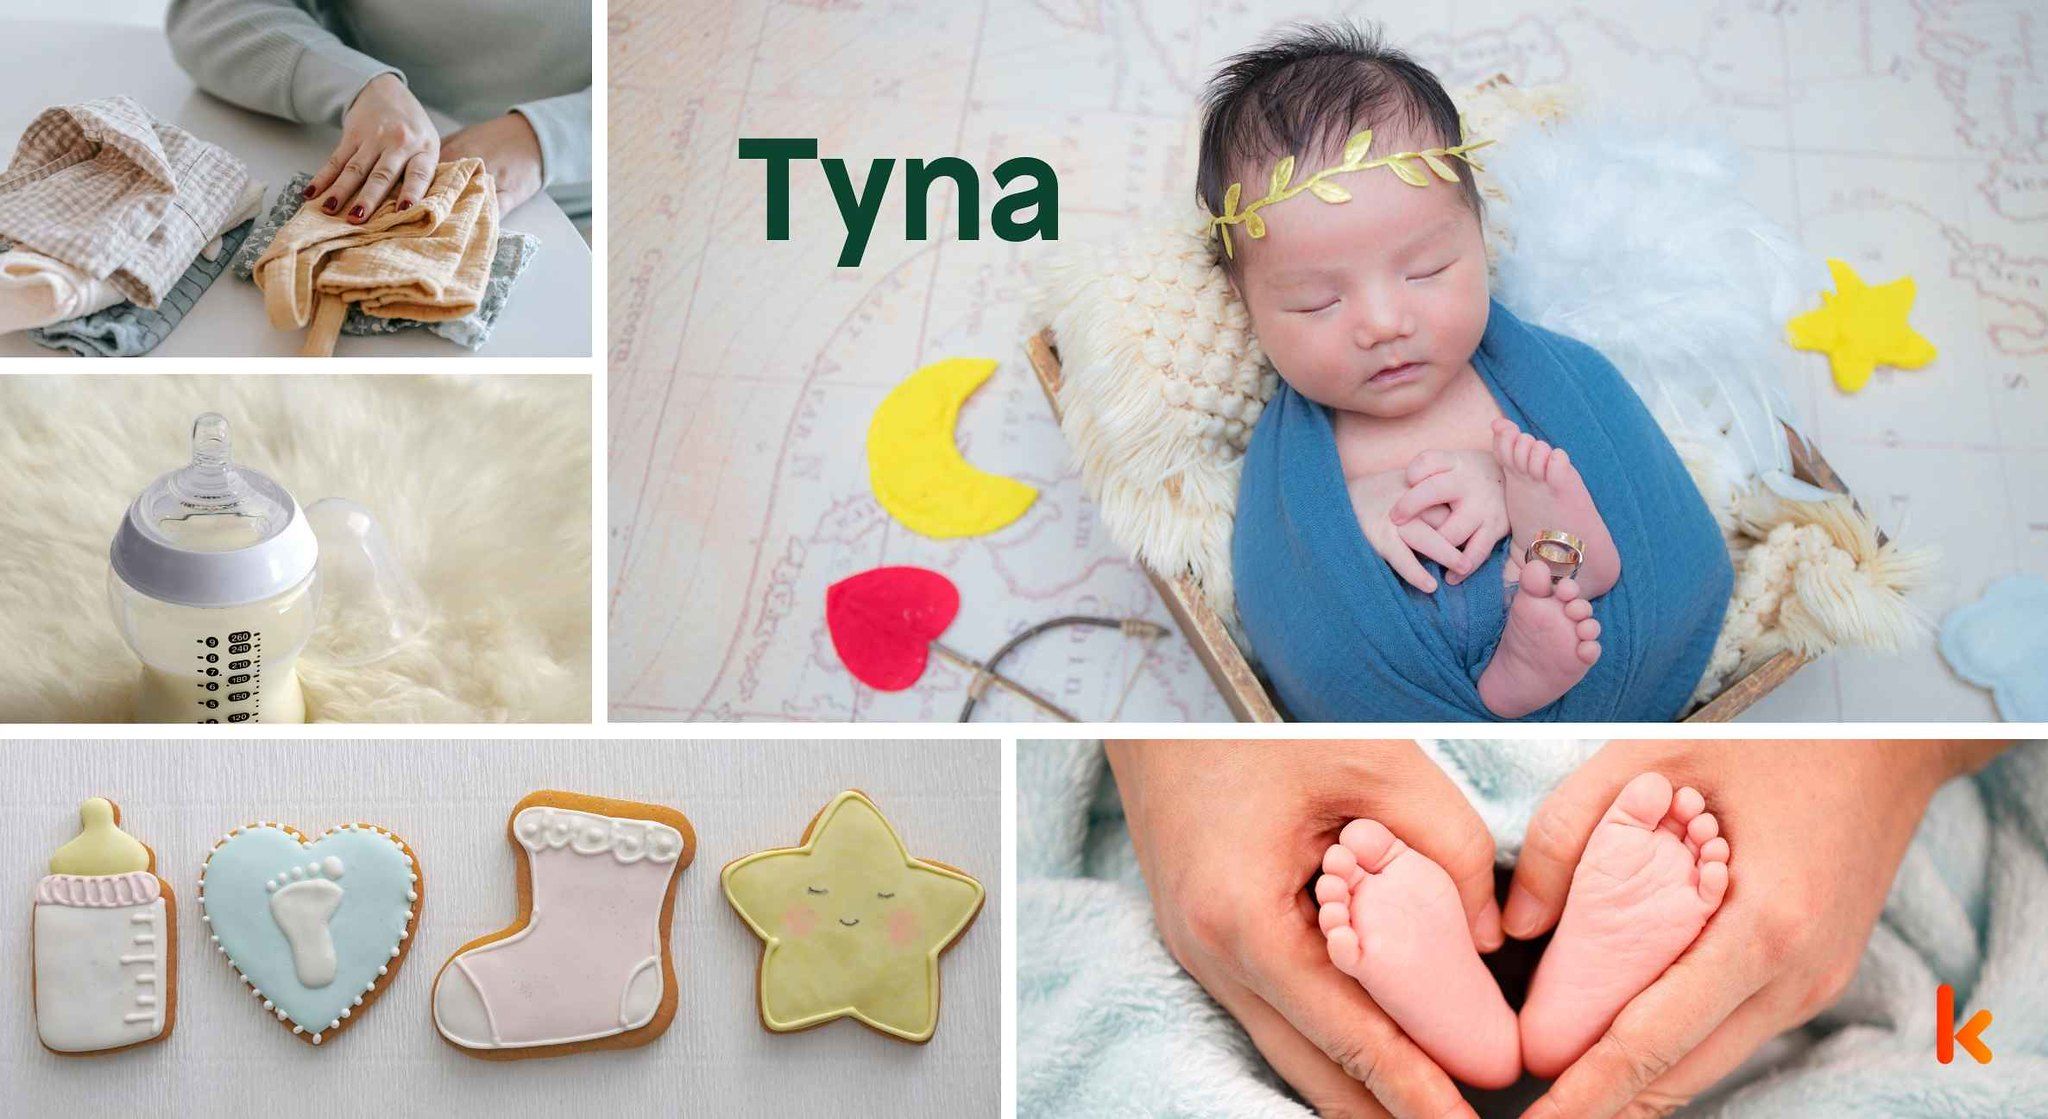 Meaning of the name Tyna